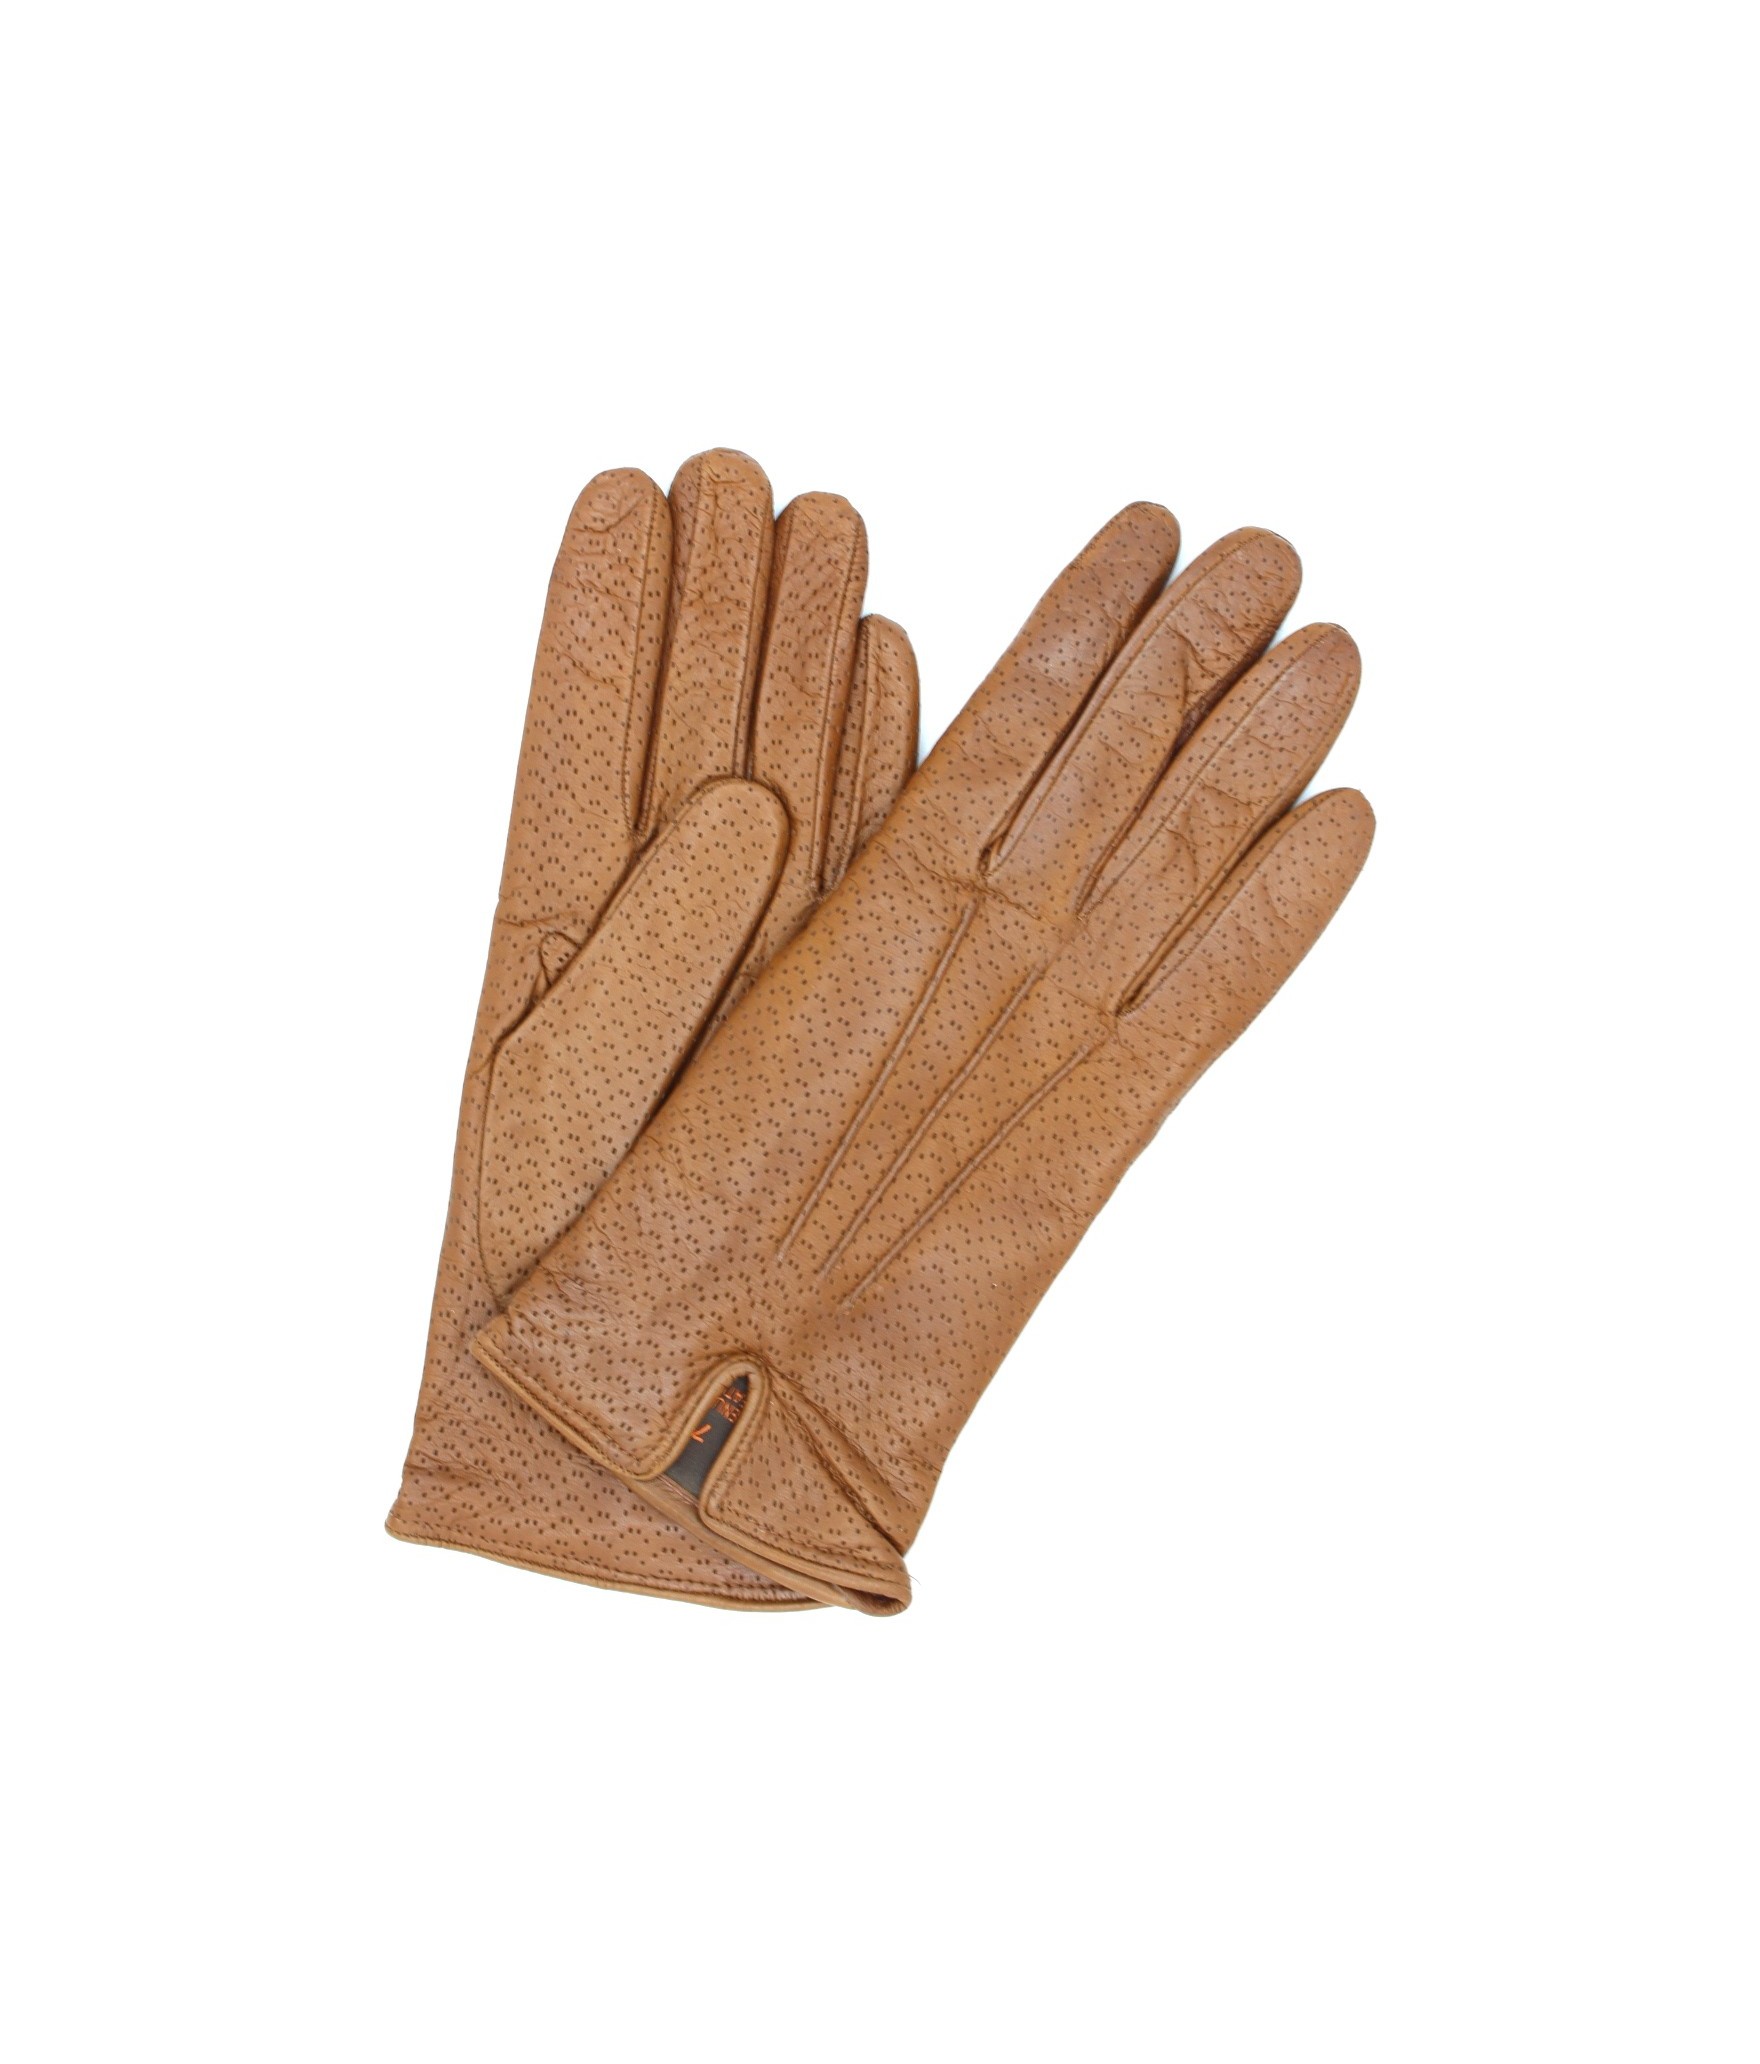 1922 Kid Leather Gloves Cashmere Lined Perf. Tan 